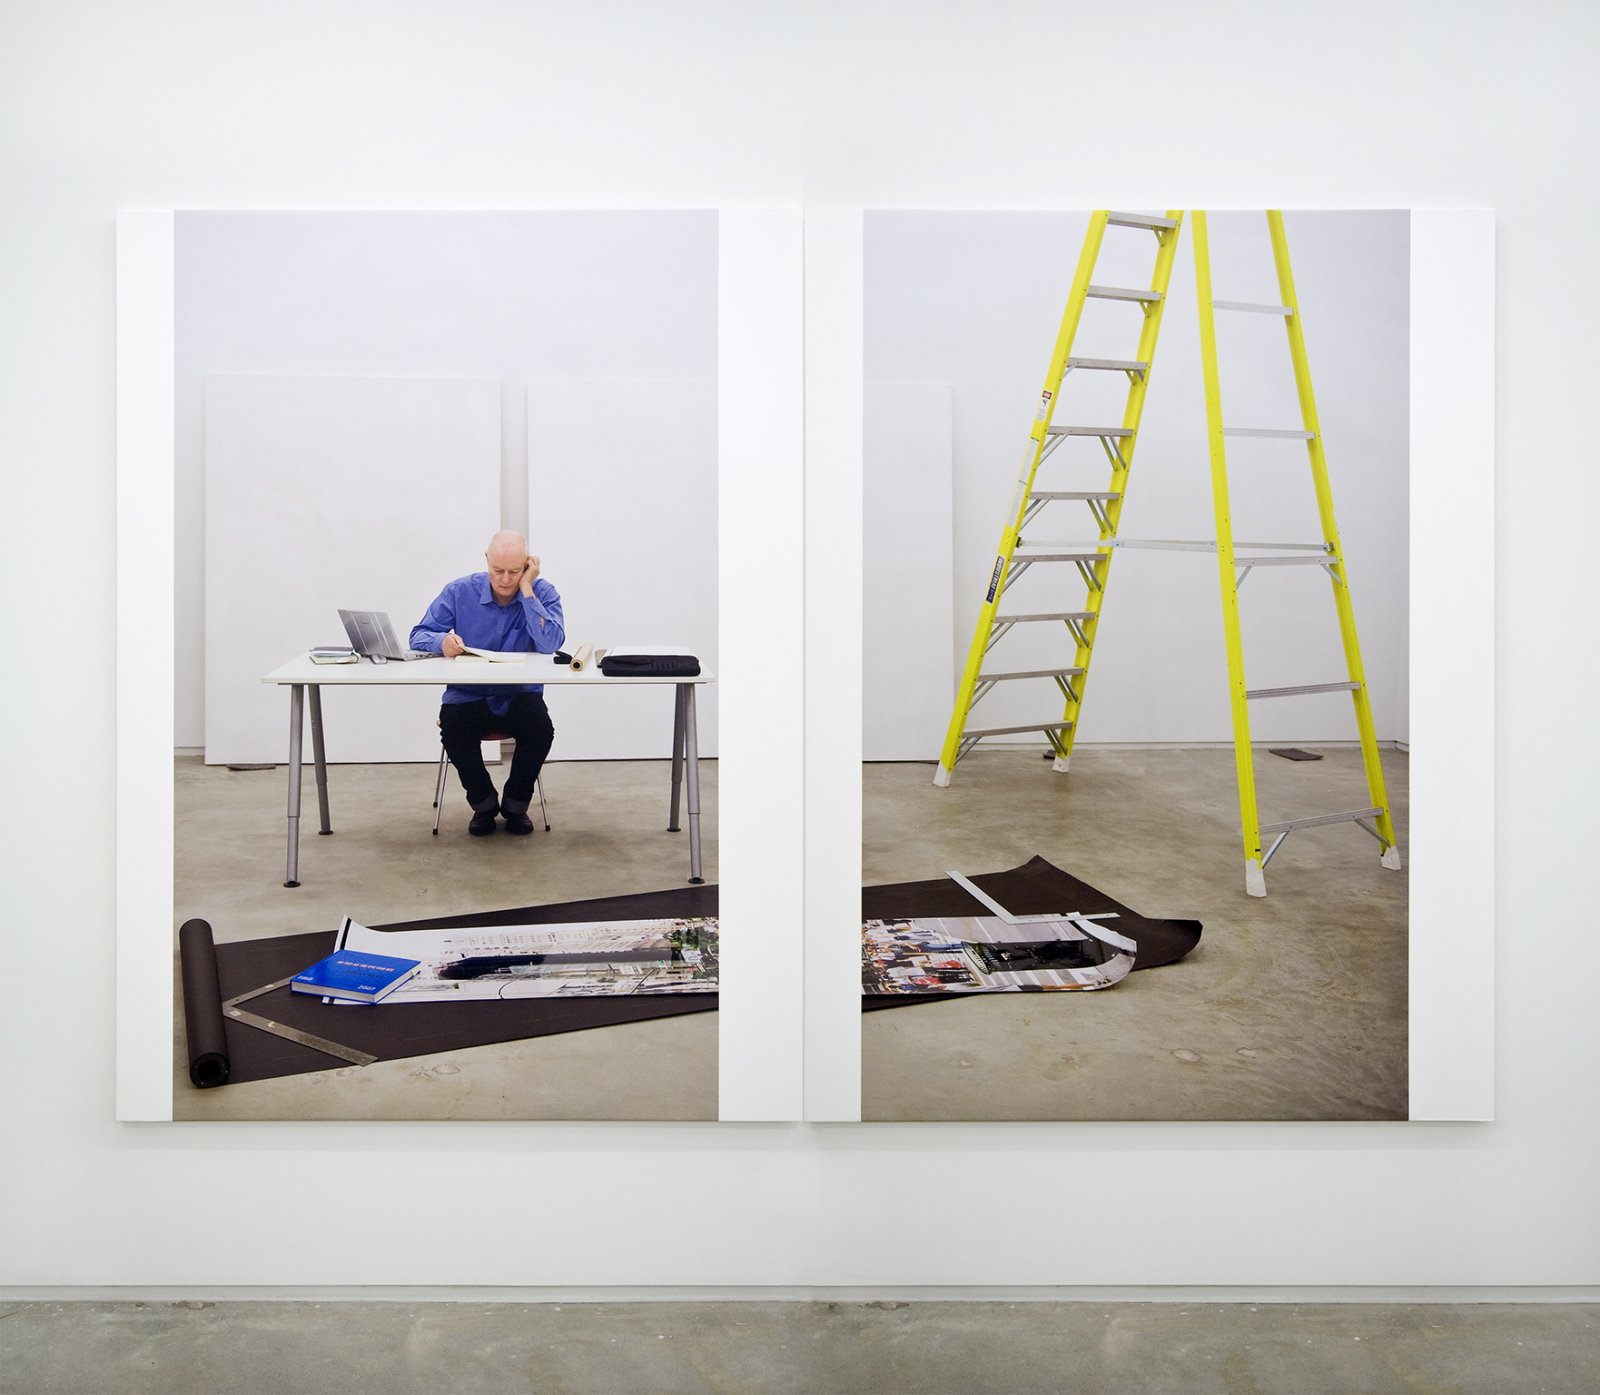 Ian Wallace, At Work 2008, 2008, photolaminate with acrylic on canvas diptych panels, 80 x 120 in. (203 x 305 cm)